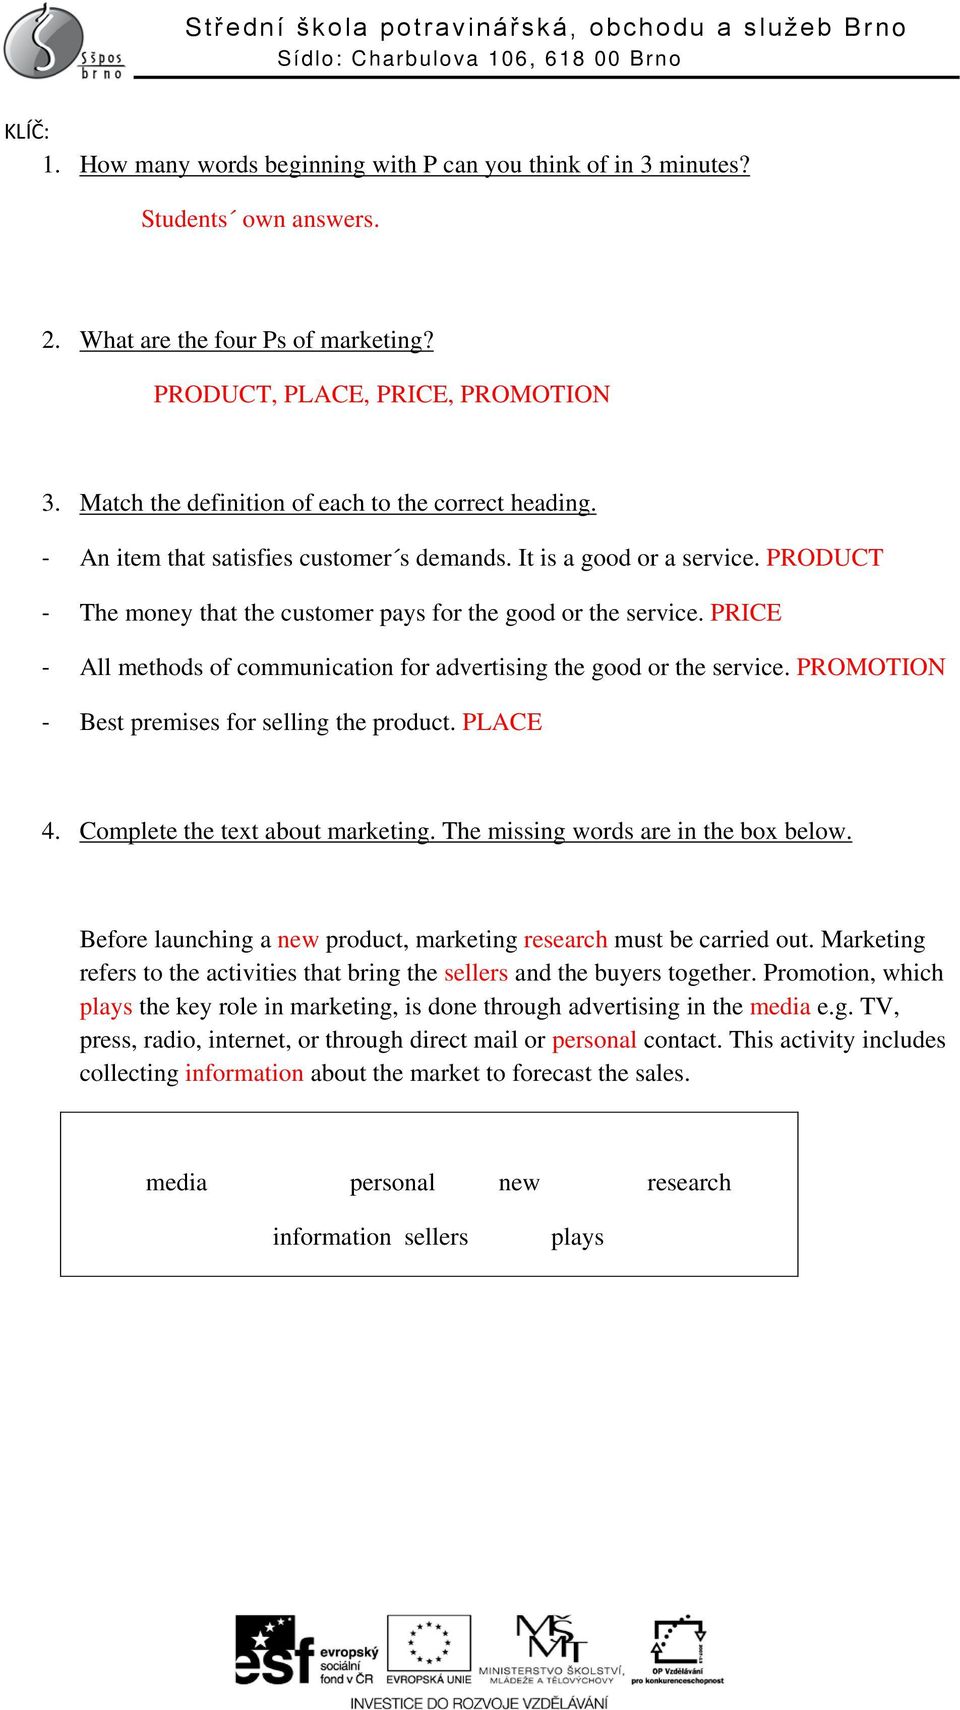 PRODUCT - The money that the customer pays for the good or the service. PRICE - All methods of communication for advertising the good or the service. PROMOTION - Best premises for selling the product.